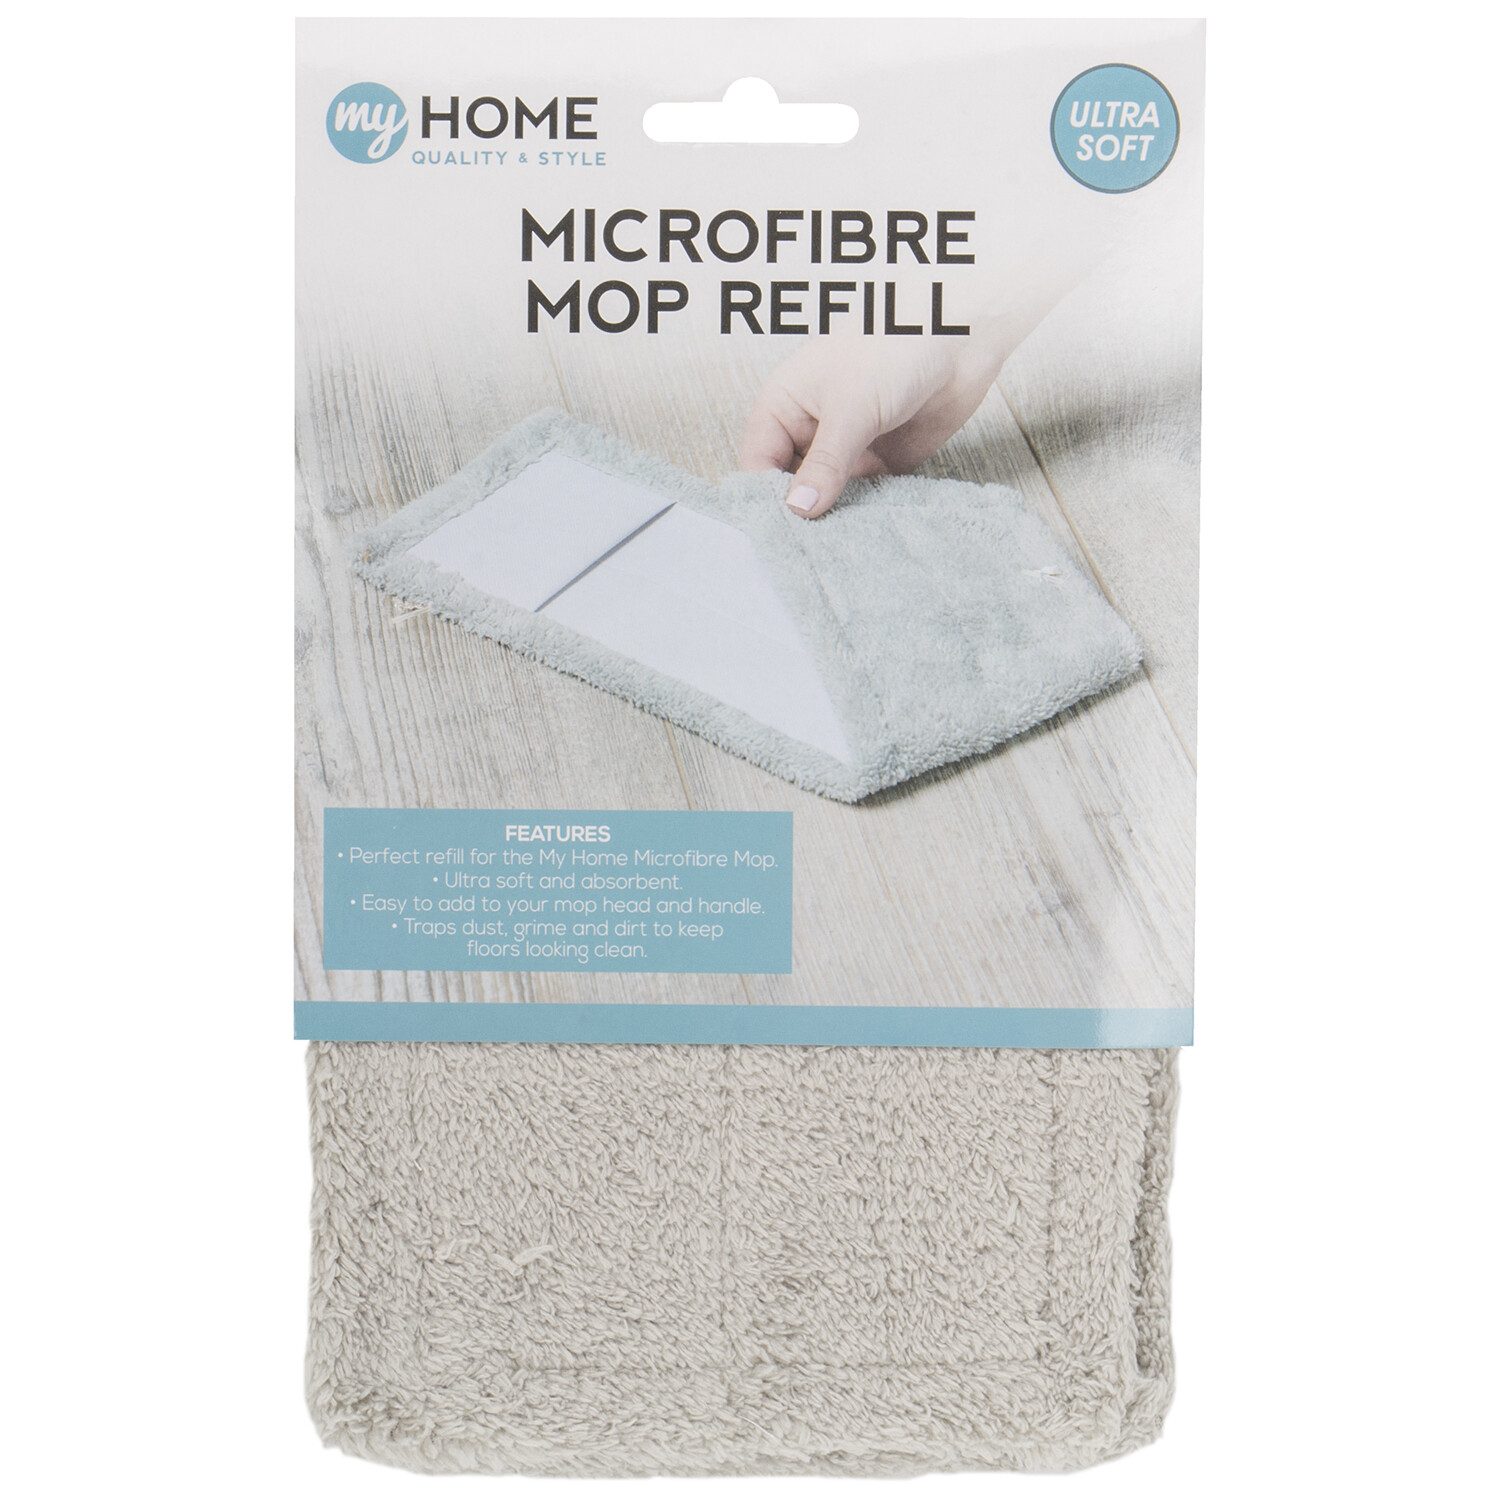 My Home Microfibre Mop Refill Image